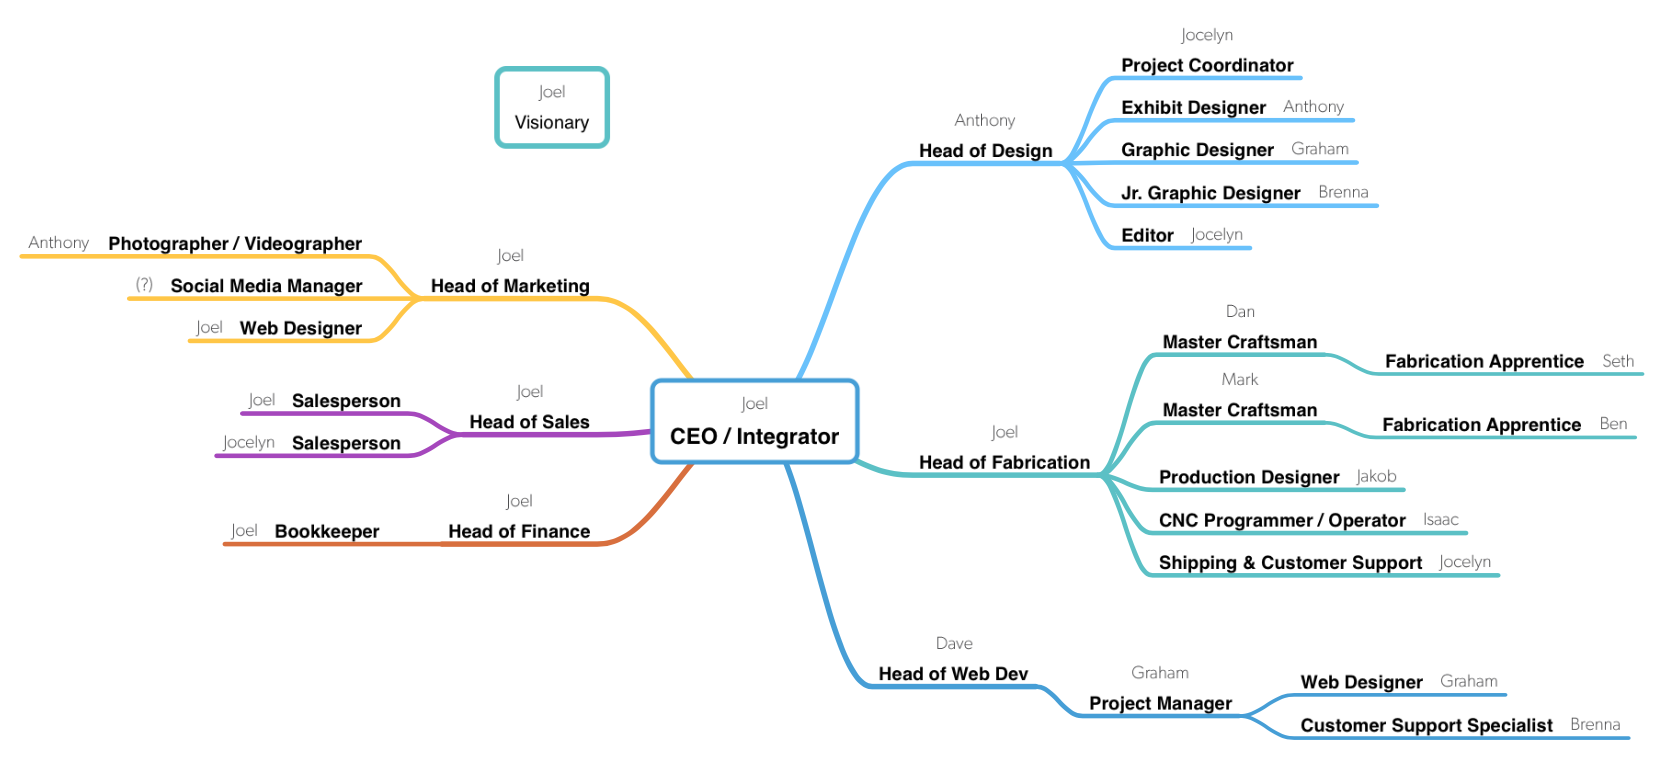 Org Chart - Upland Exhibits